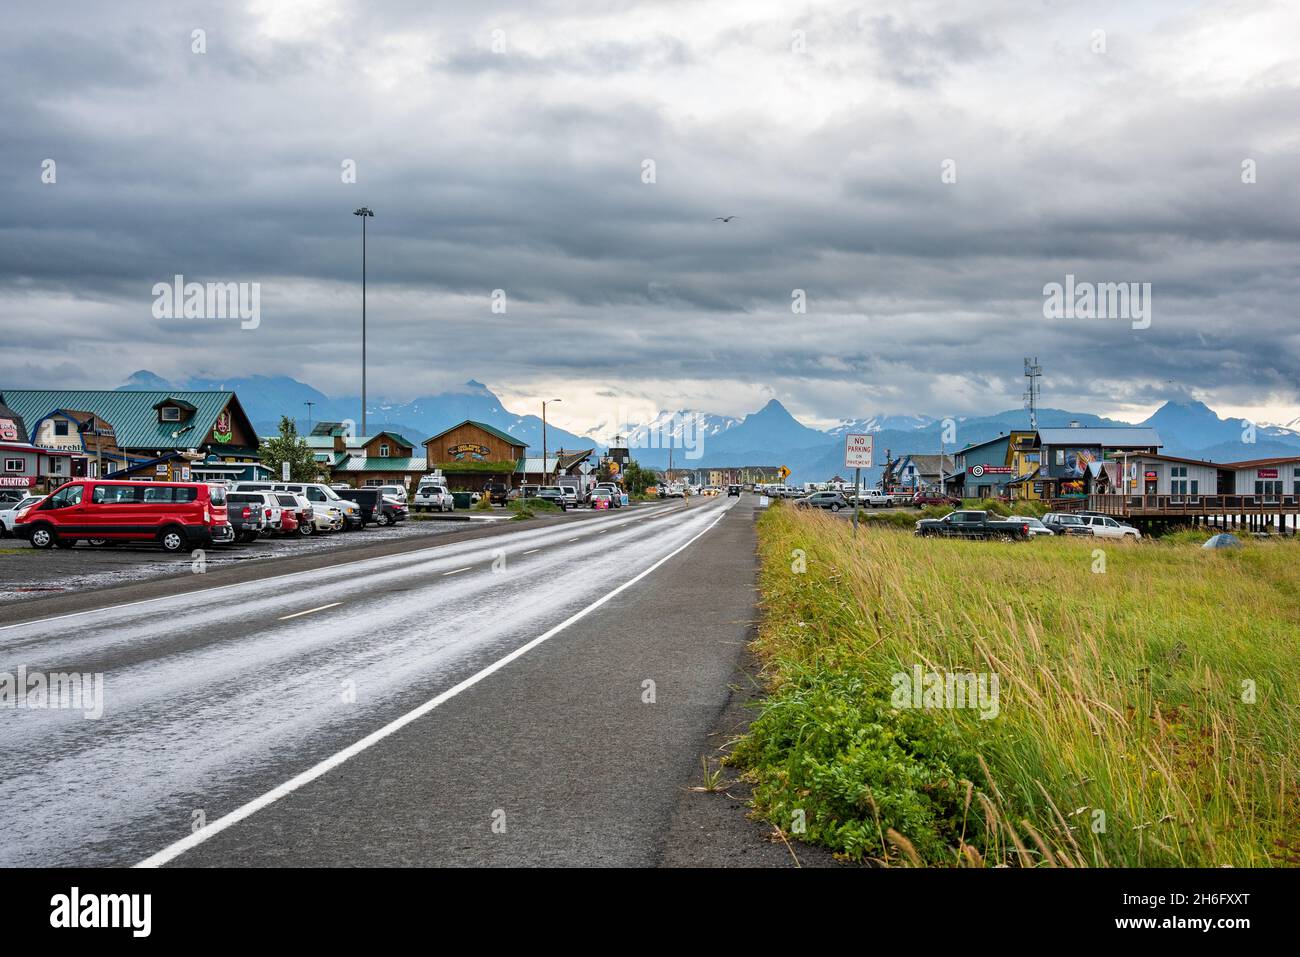 Homer Spit, Alaska, USA - August 07, 2018: View of the main street of Homer Spit. A tourist shopping area with gift shops and restaurants. Stock Photo